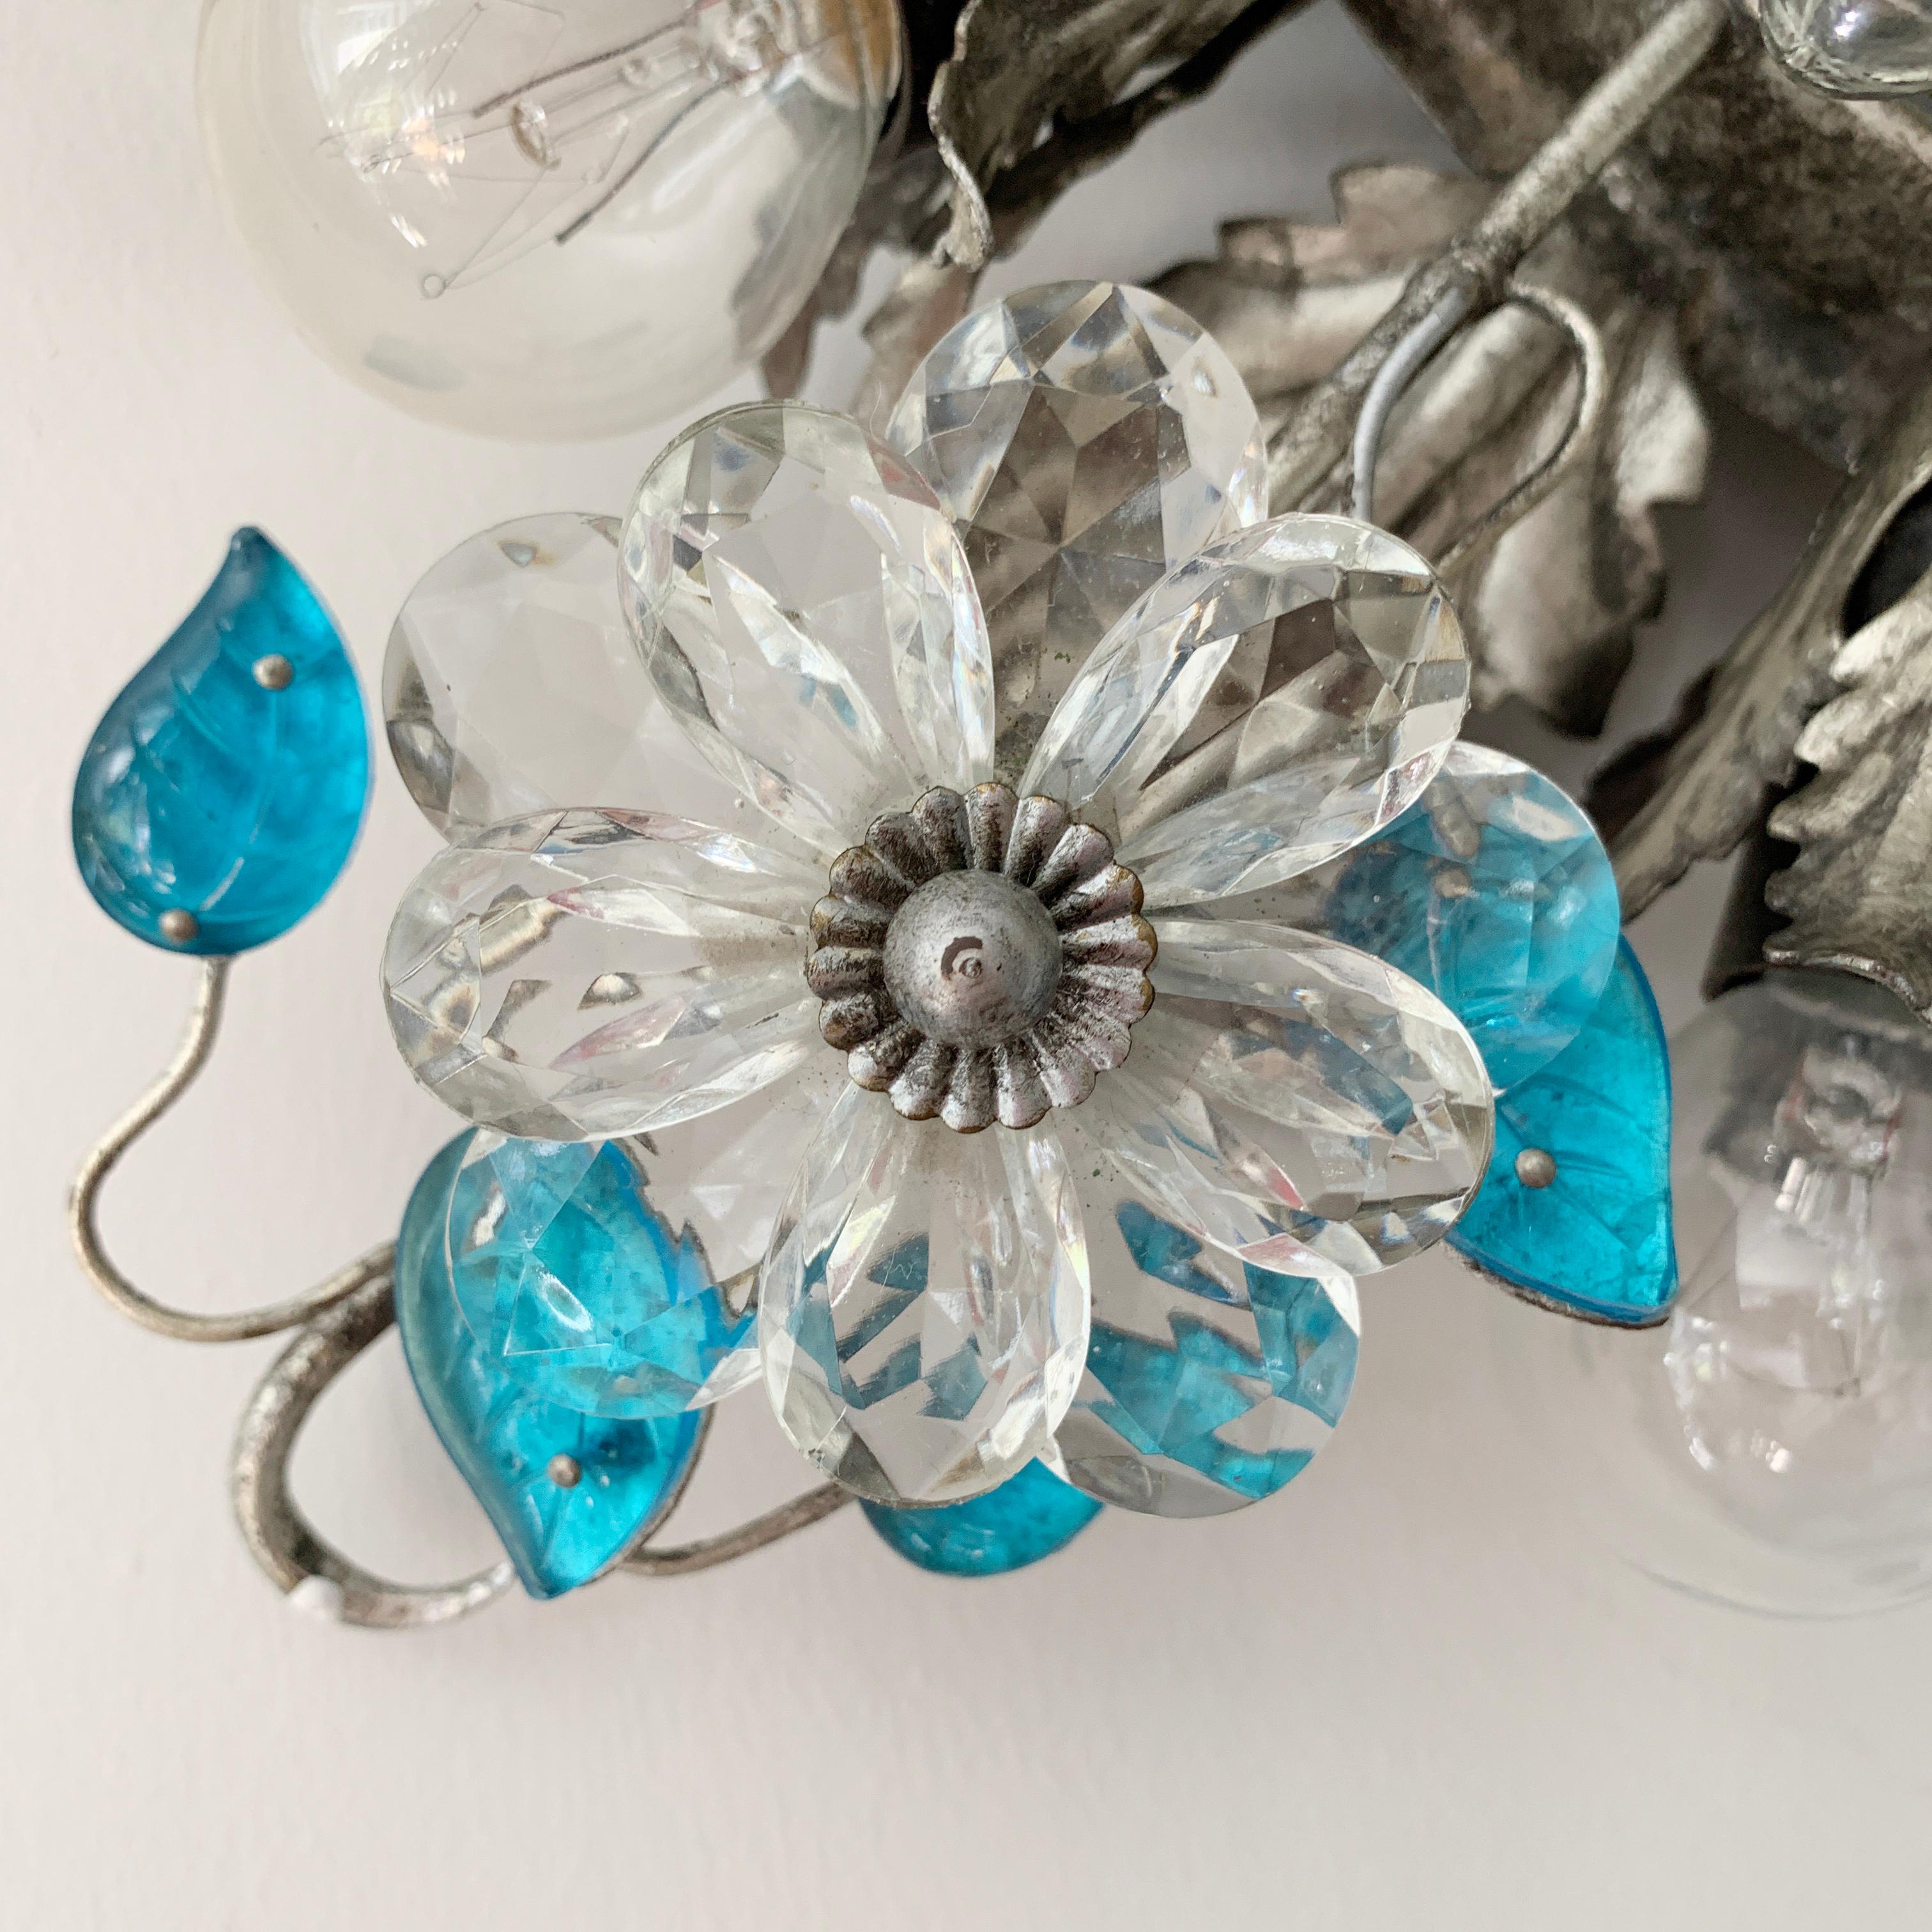 Banci Firenze Silver Florentine Ceiling Light with Murano Glass Flowers 2